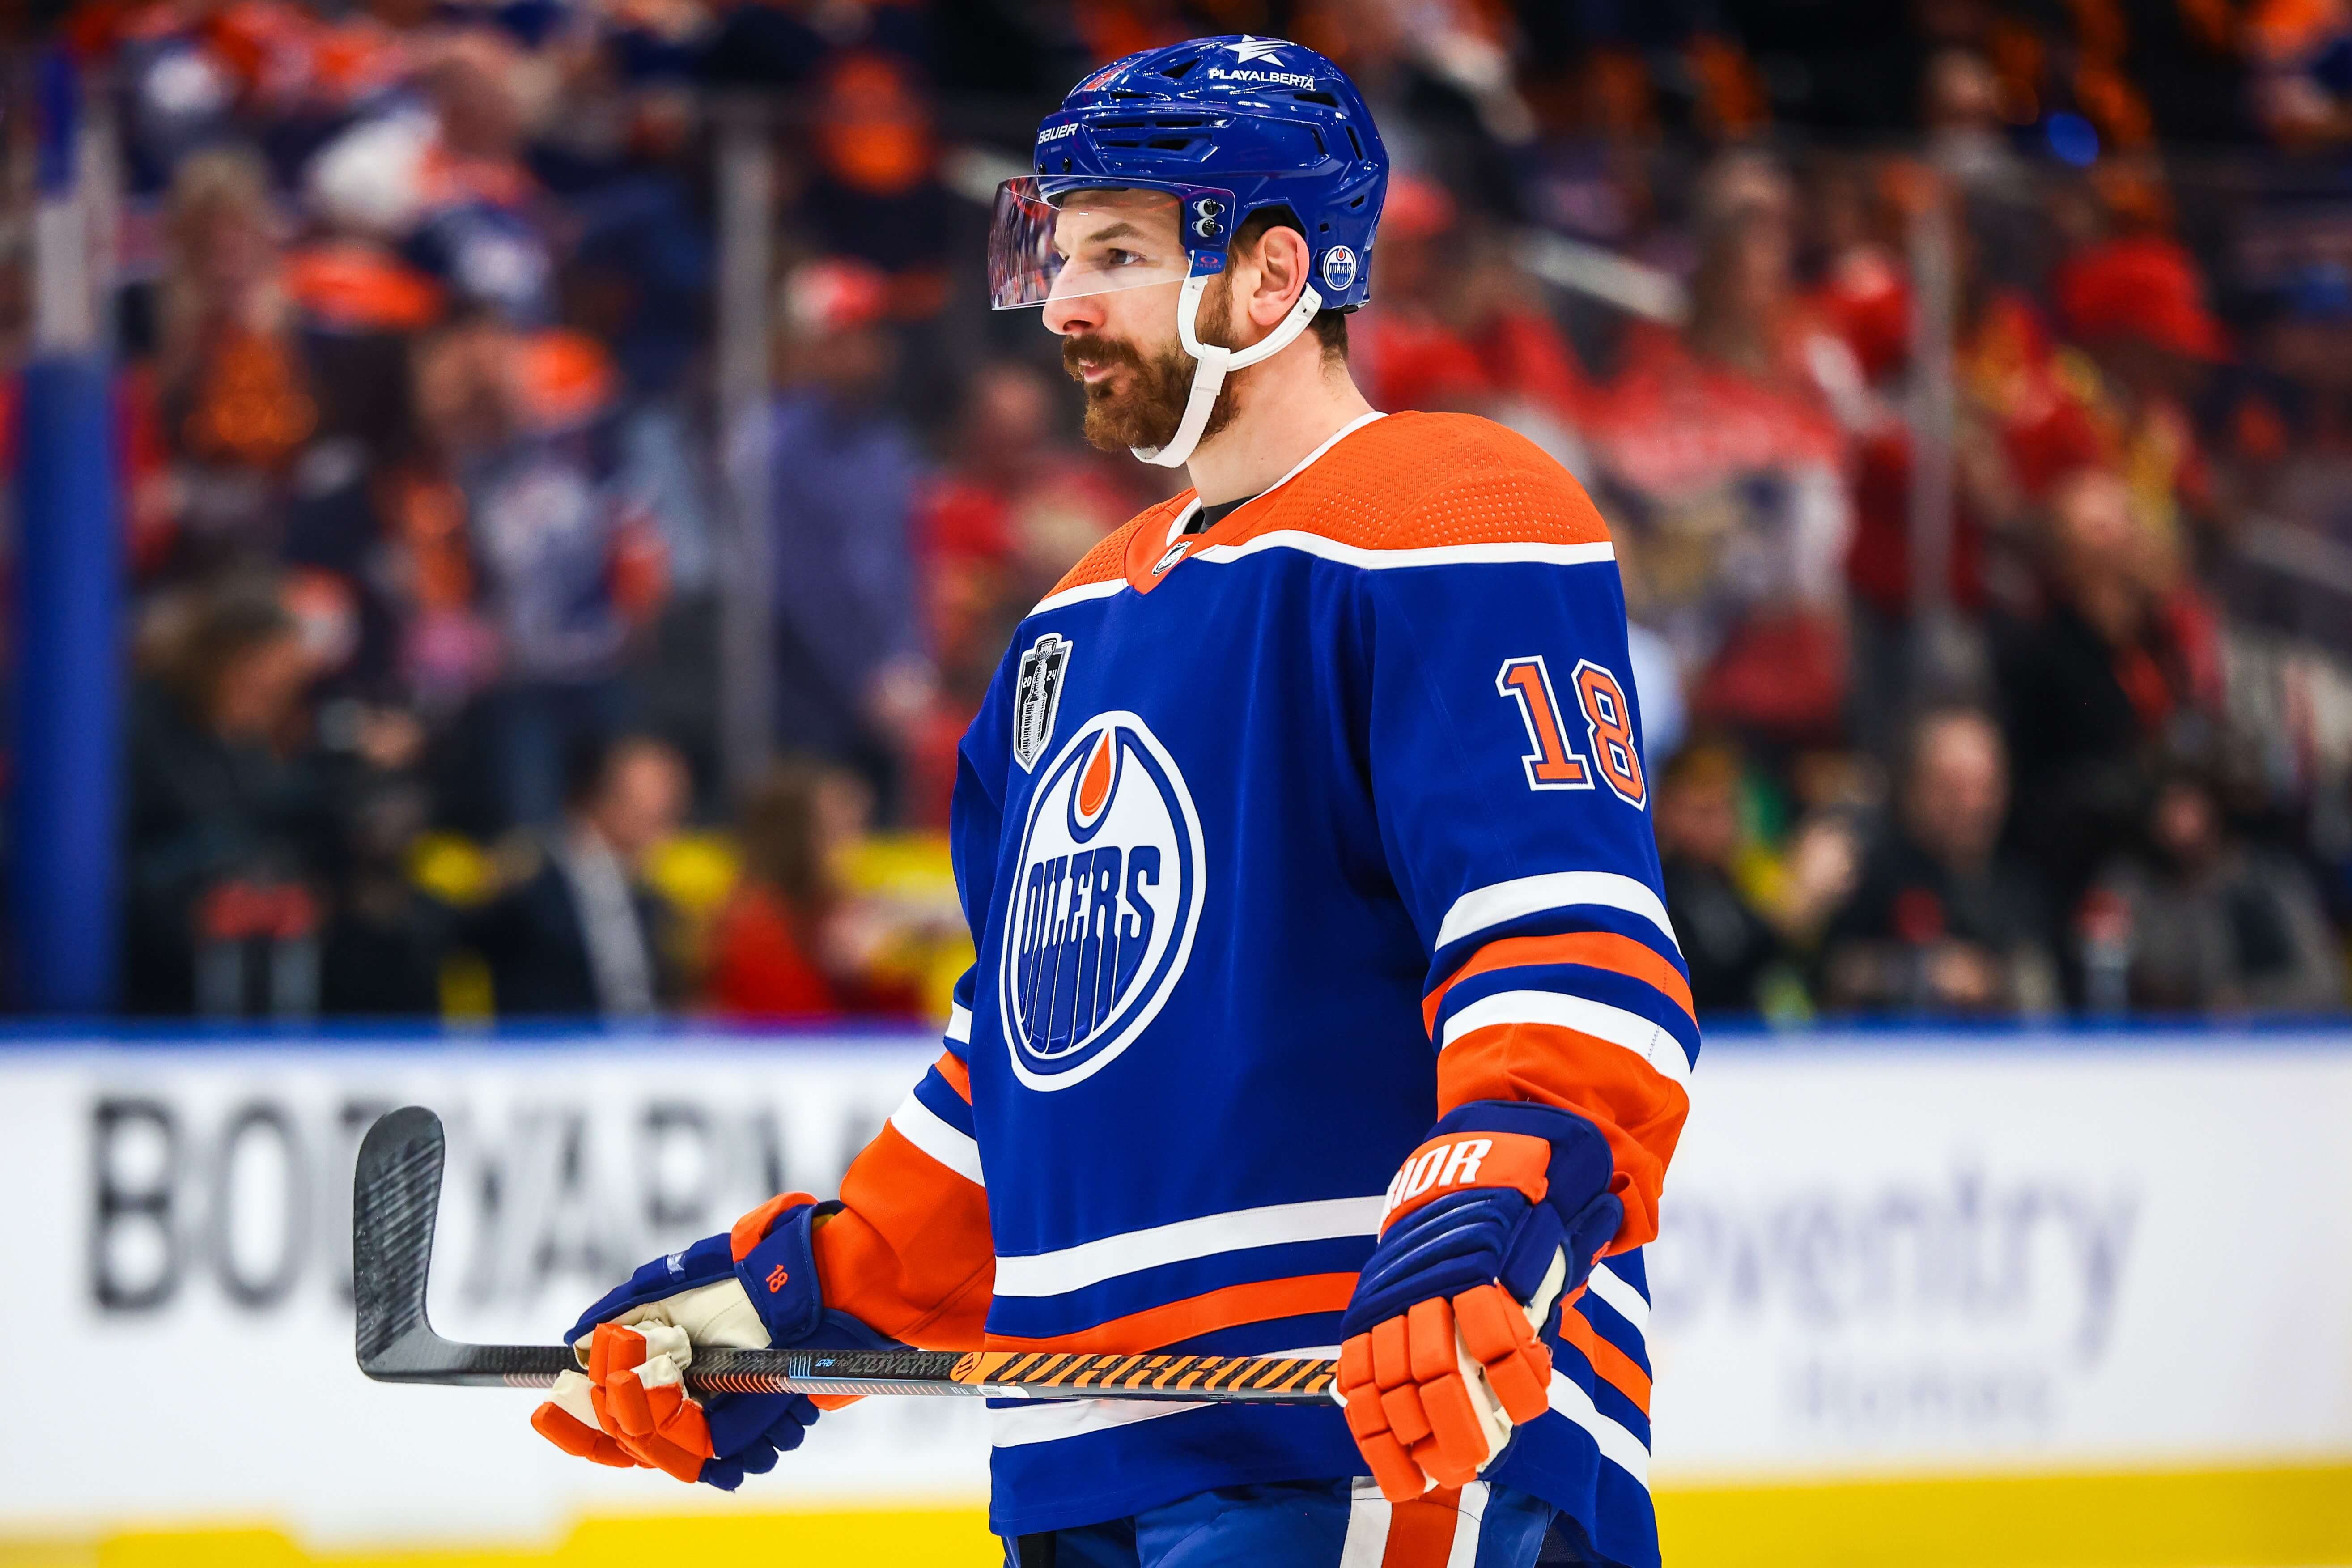 Oilers vs Panthers Picks & Predictions: Early Lean on the Under in Game 7